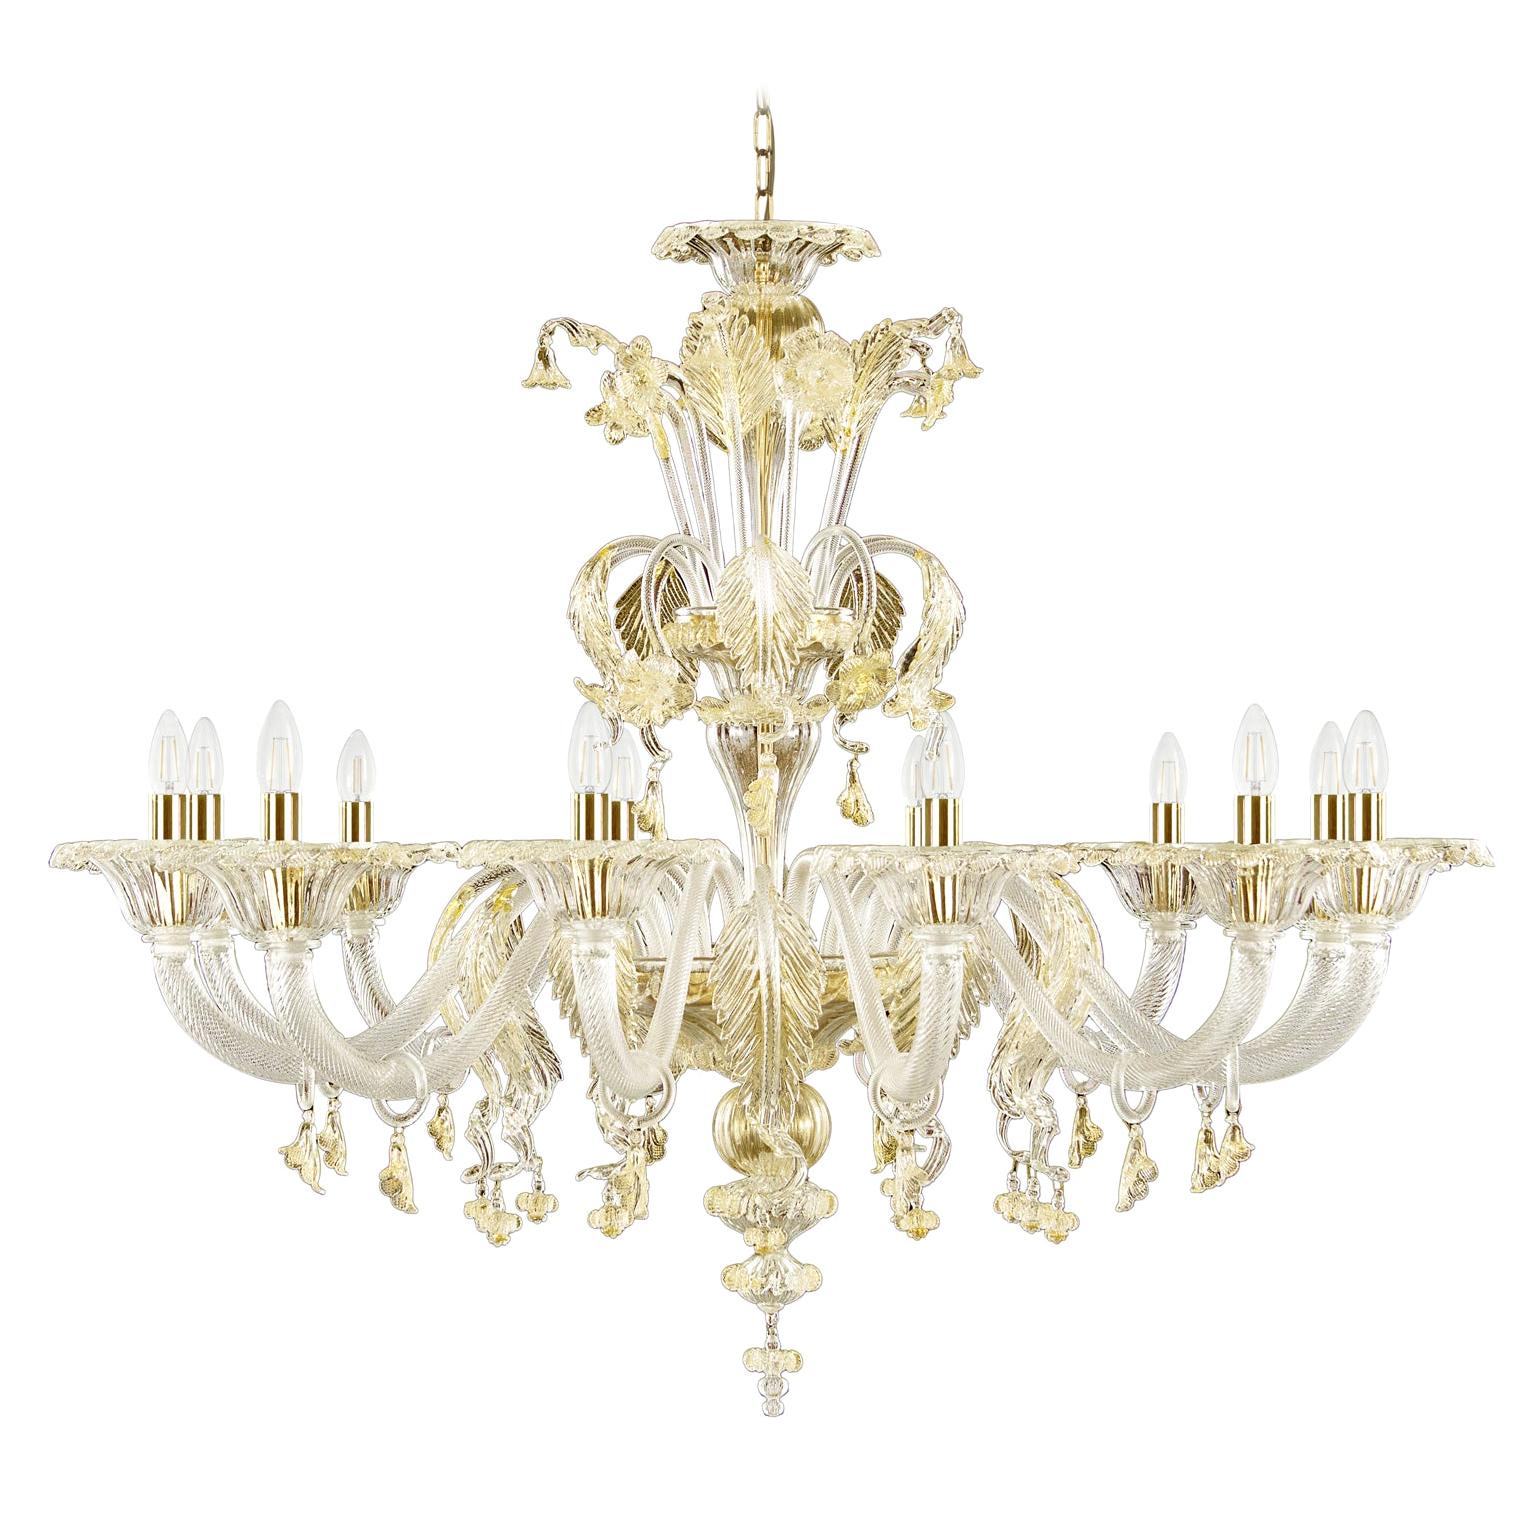 Artistic Murano Chandelier, 12 arms, clear Glass, Gold Details by Multiforme For Sale